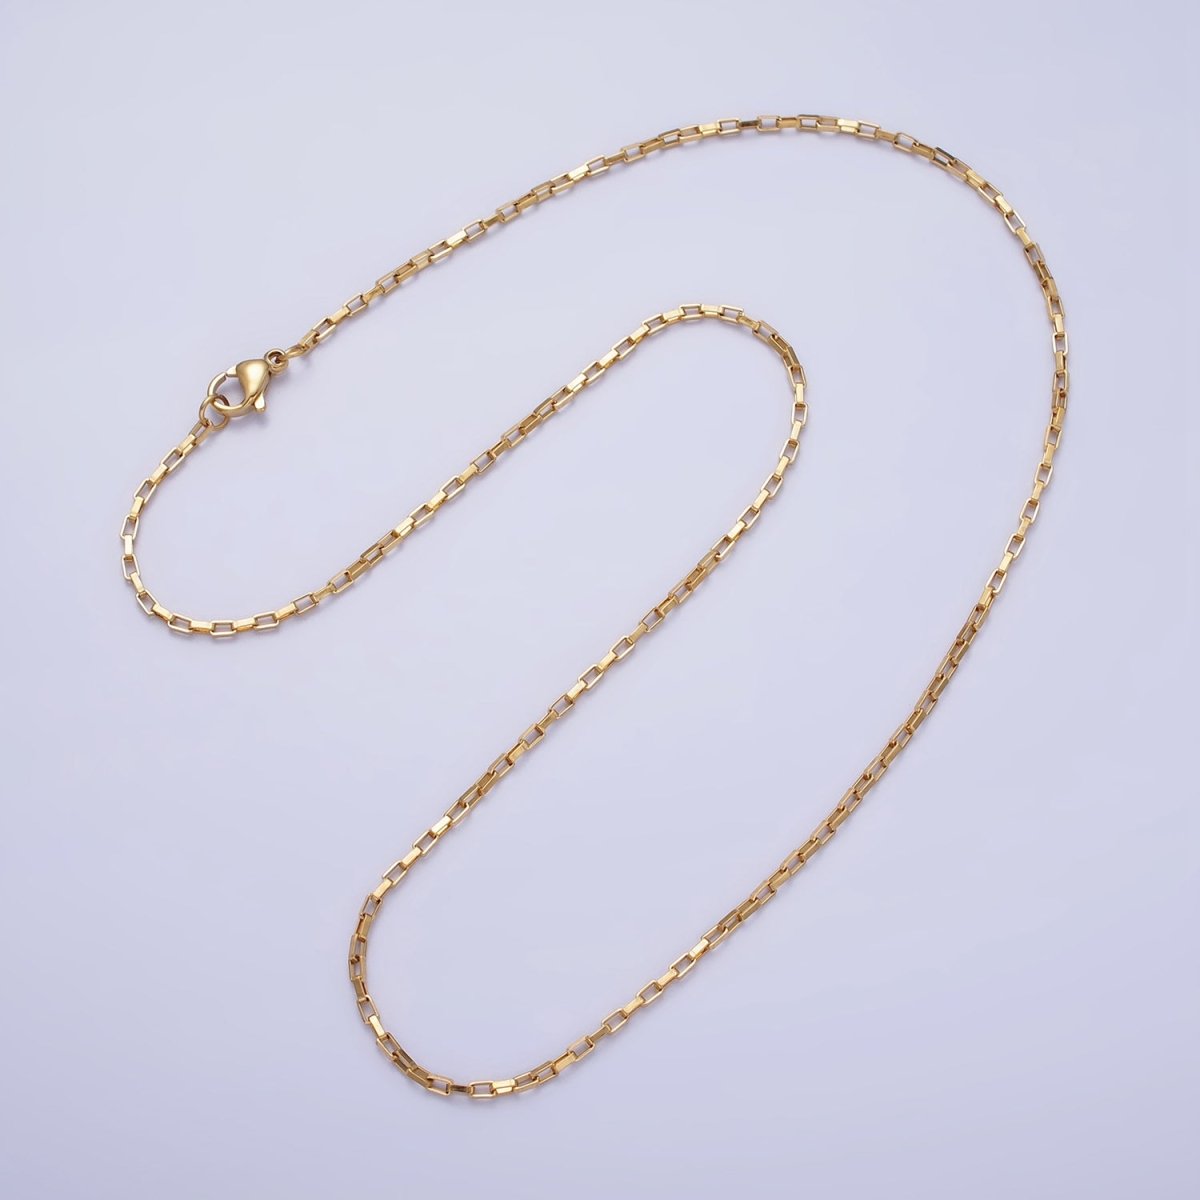 Gold Link Chain Paperclip Chain Necklace Dainty Stainless Steel Link Chain 17.7 inch Jewelry Making | WA-1696 WA-1697 Clearance Pricing - DLUXCA